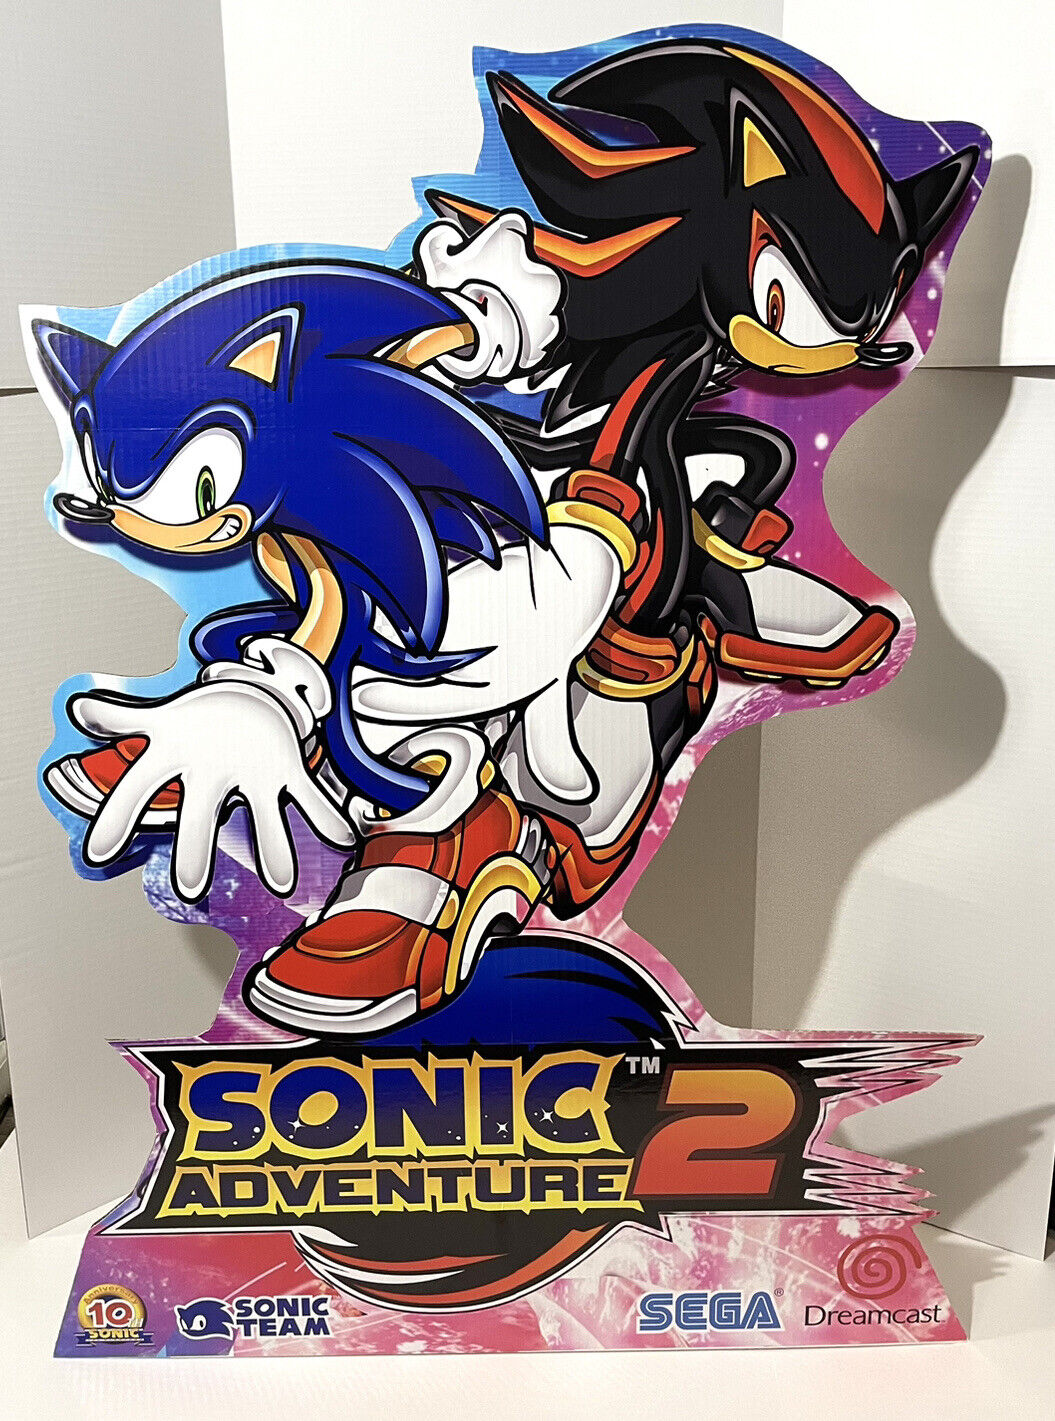 Sonic Adventure 2 Reproduction Standee Sega 35x46” Display Stand Dreamcast